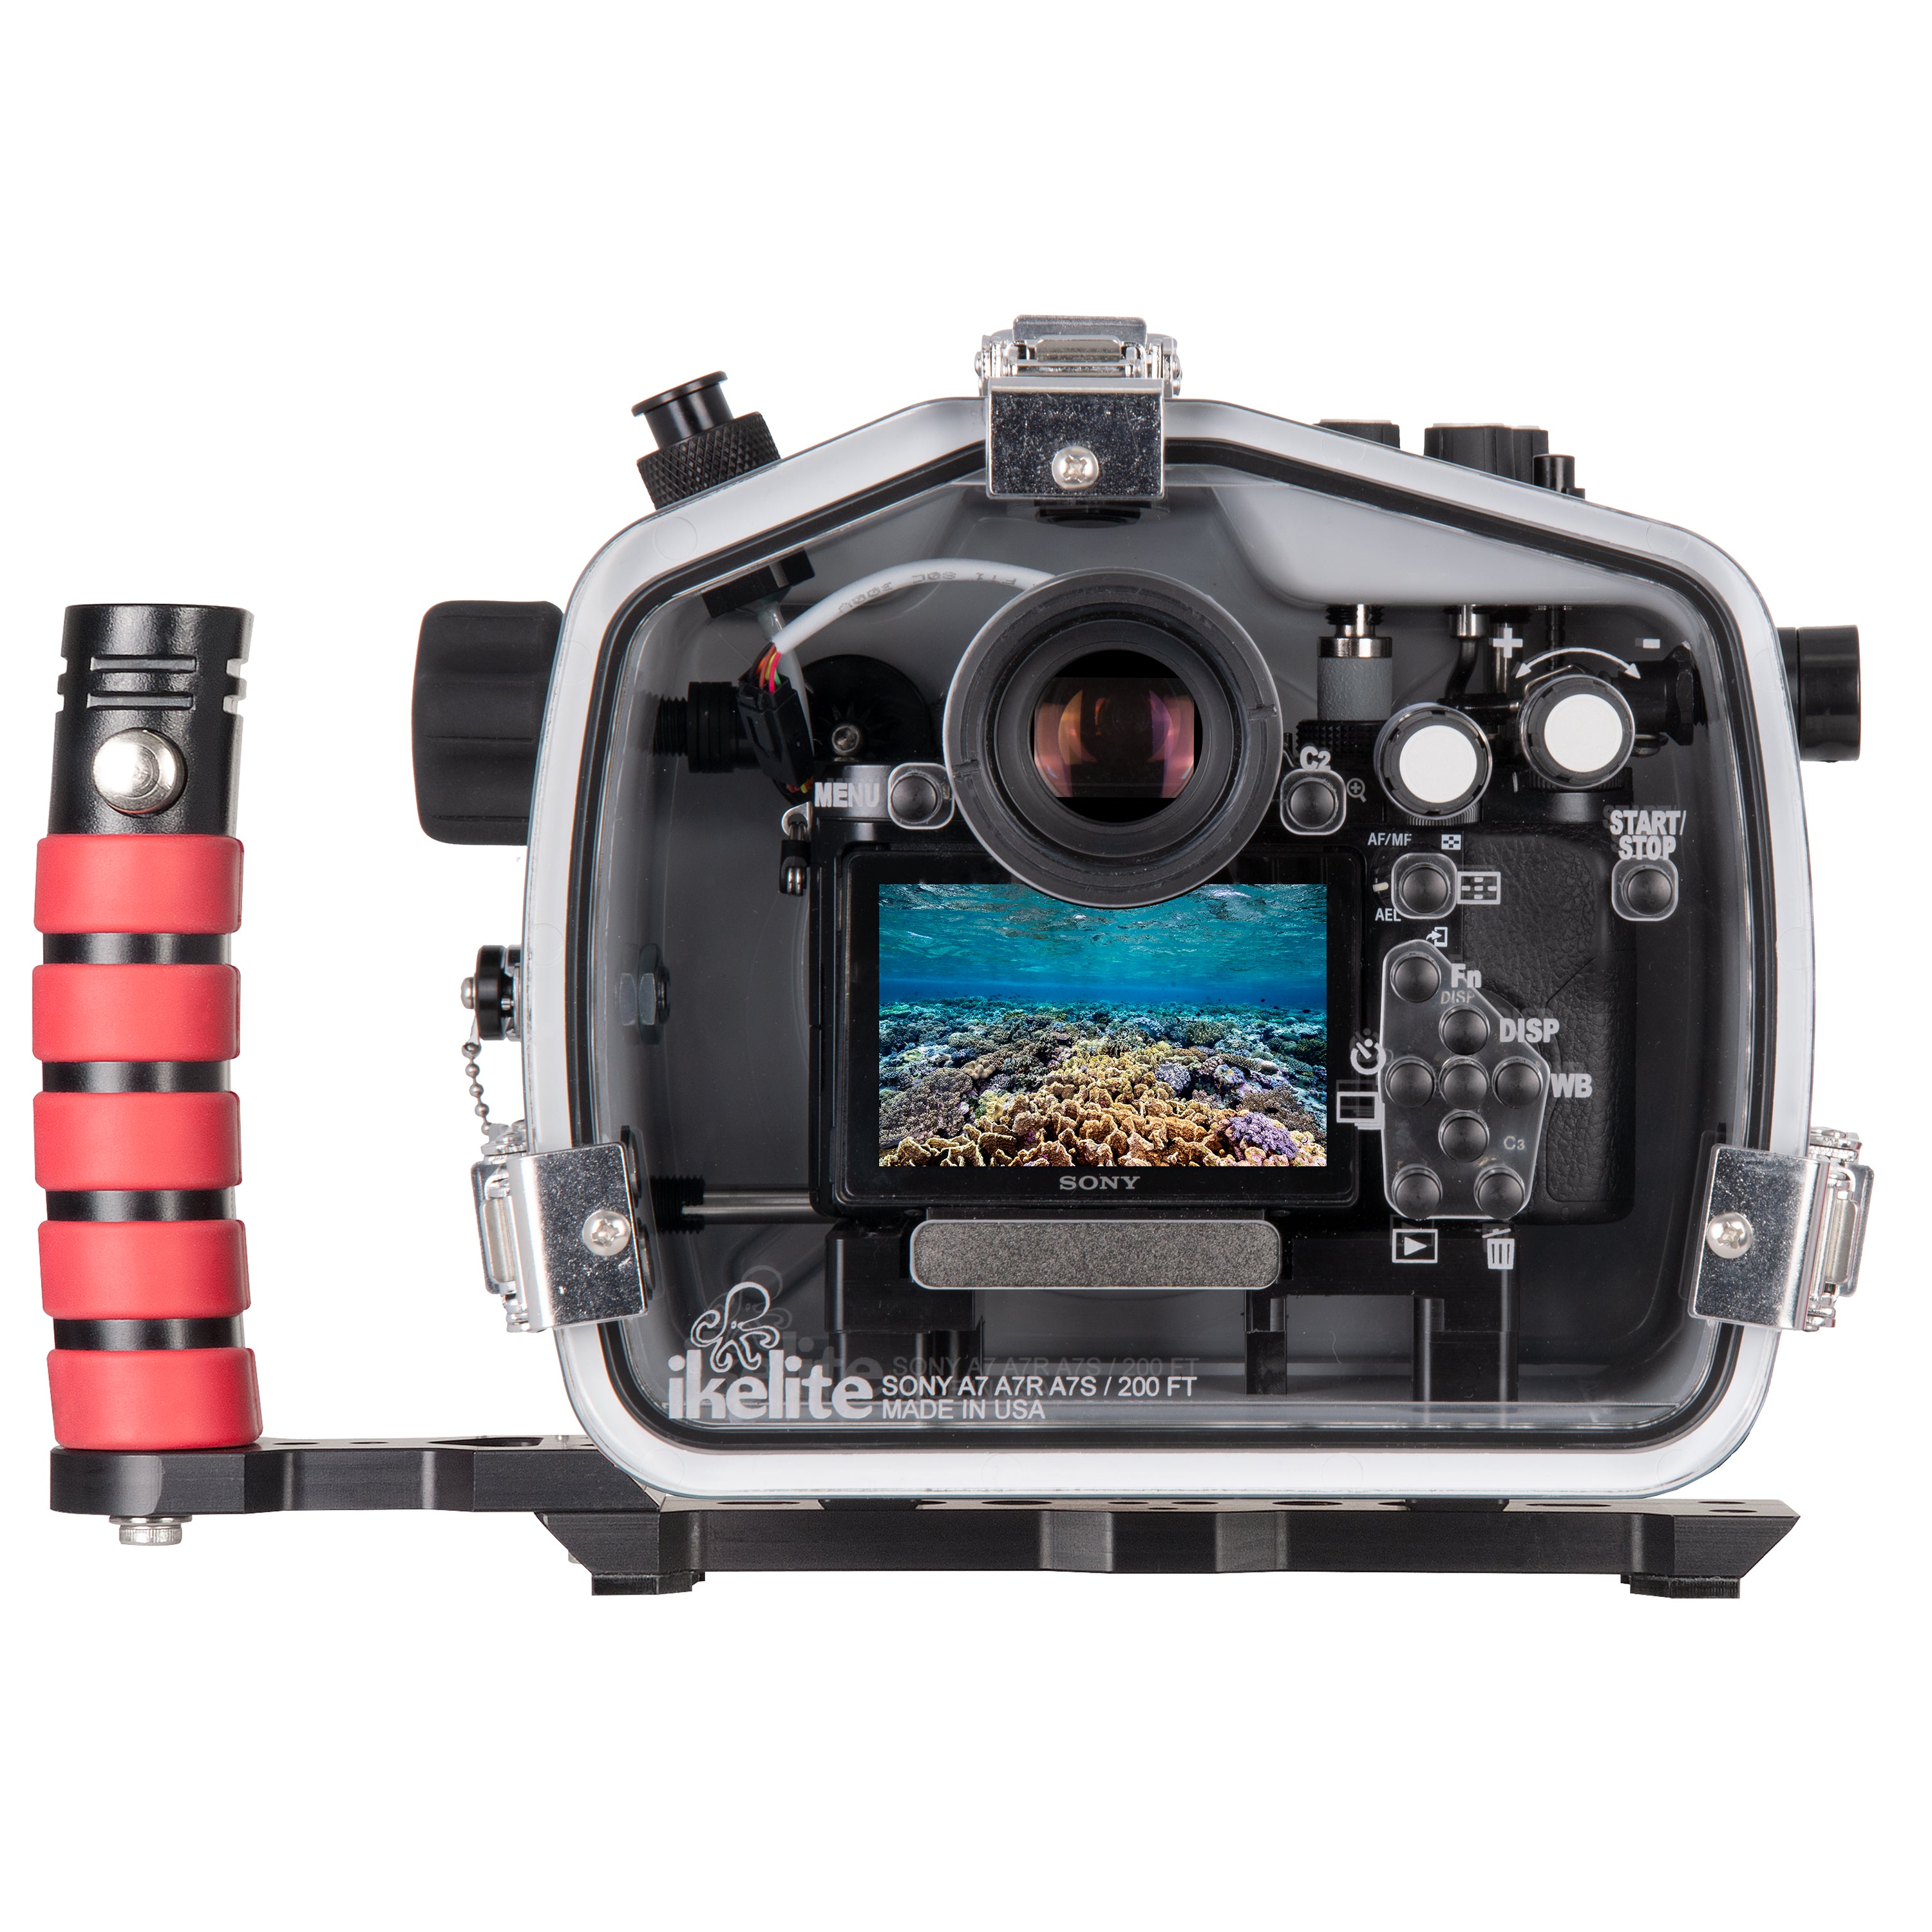 200DL Underwater Housing for Sony Alpha A7, A7R, A7S Mirrorless Cameras